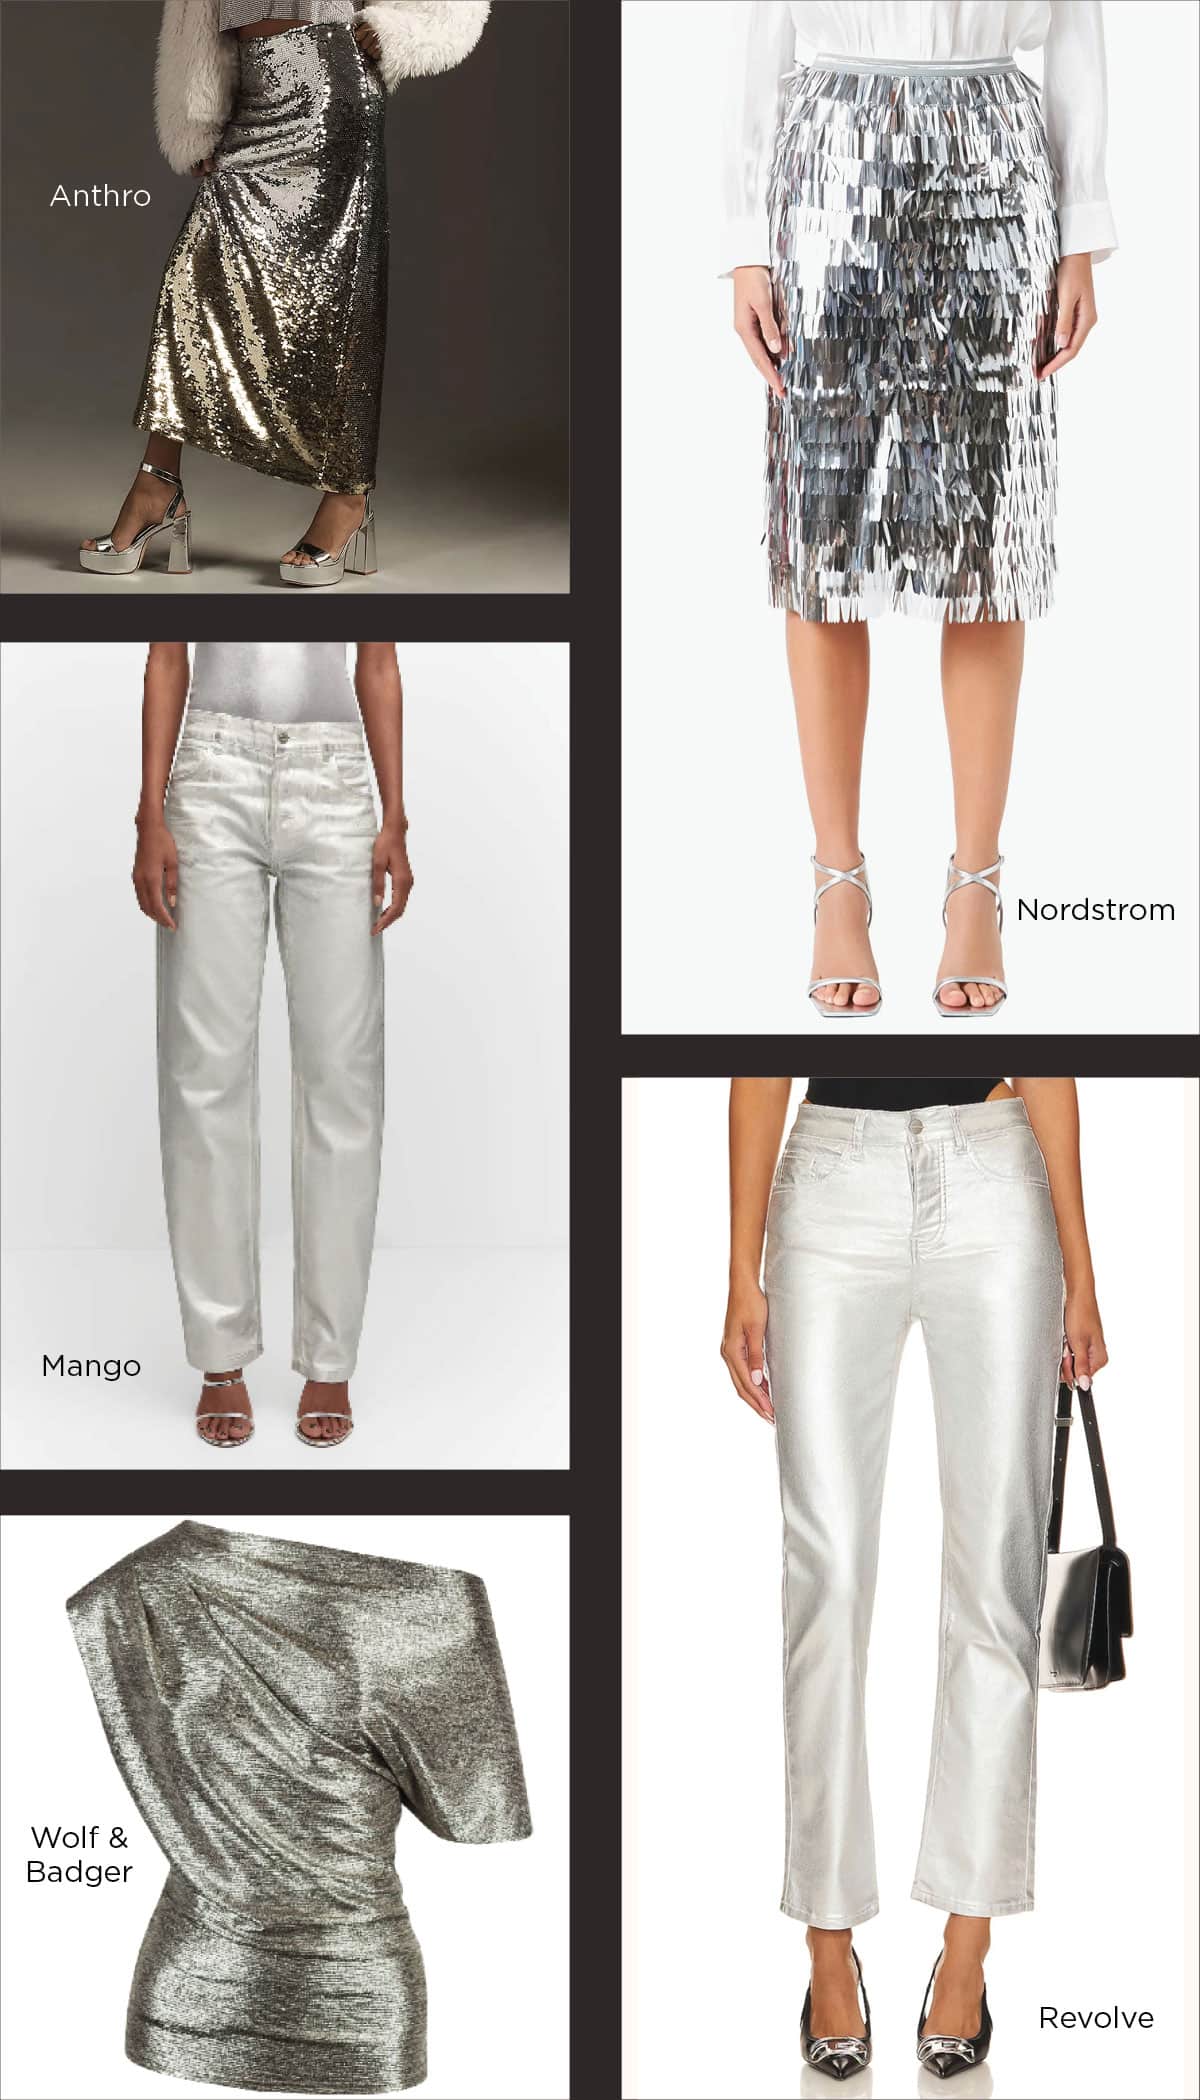 Fall Fashion Trends 2023 - Shiny metallics will be everywhere like sequin skirts, silver pants, glitter tops, and more